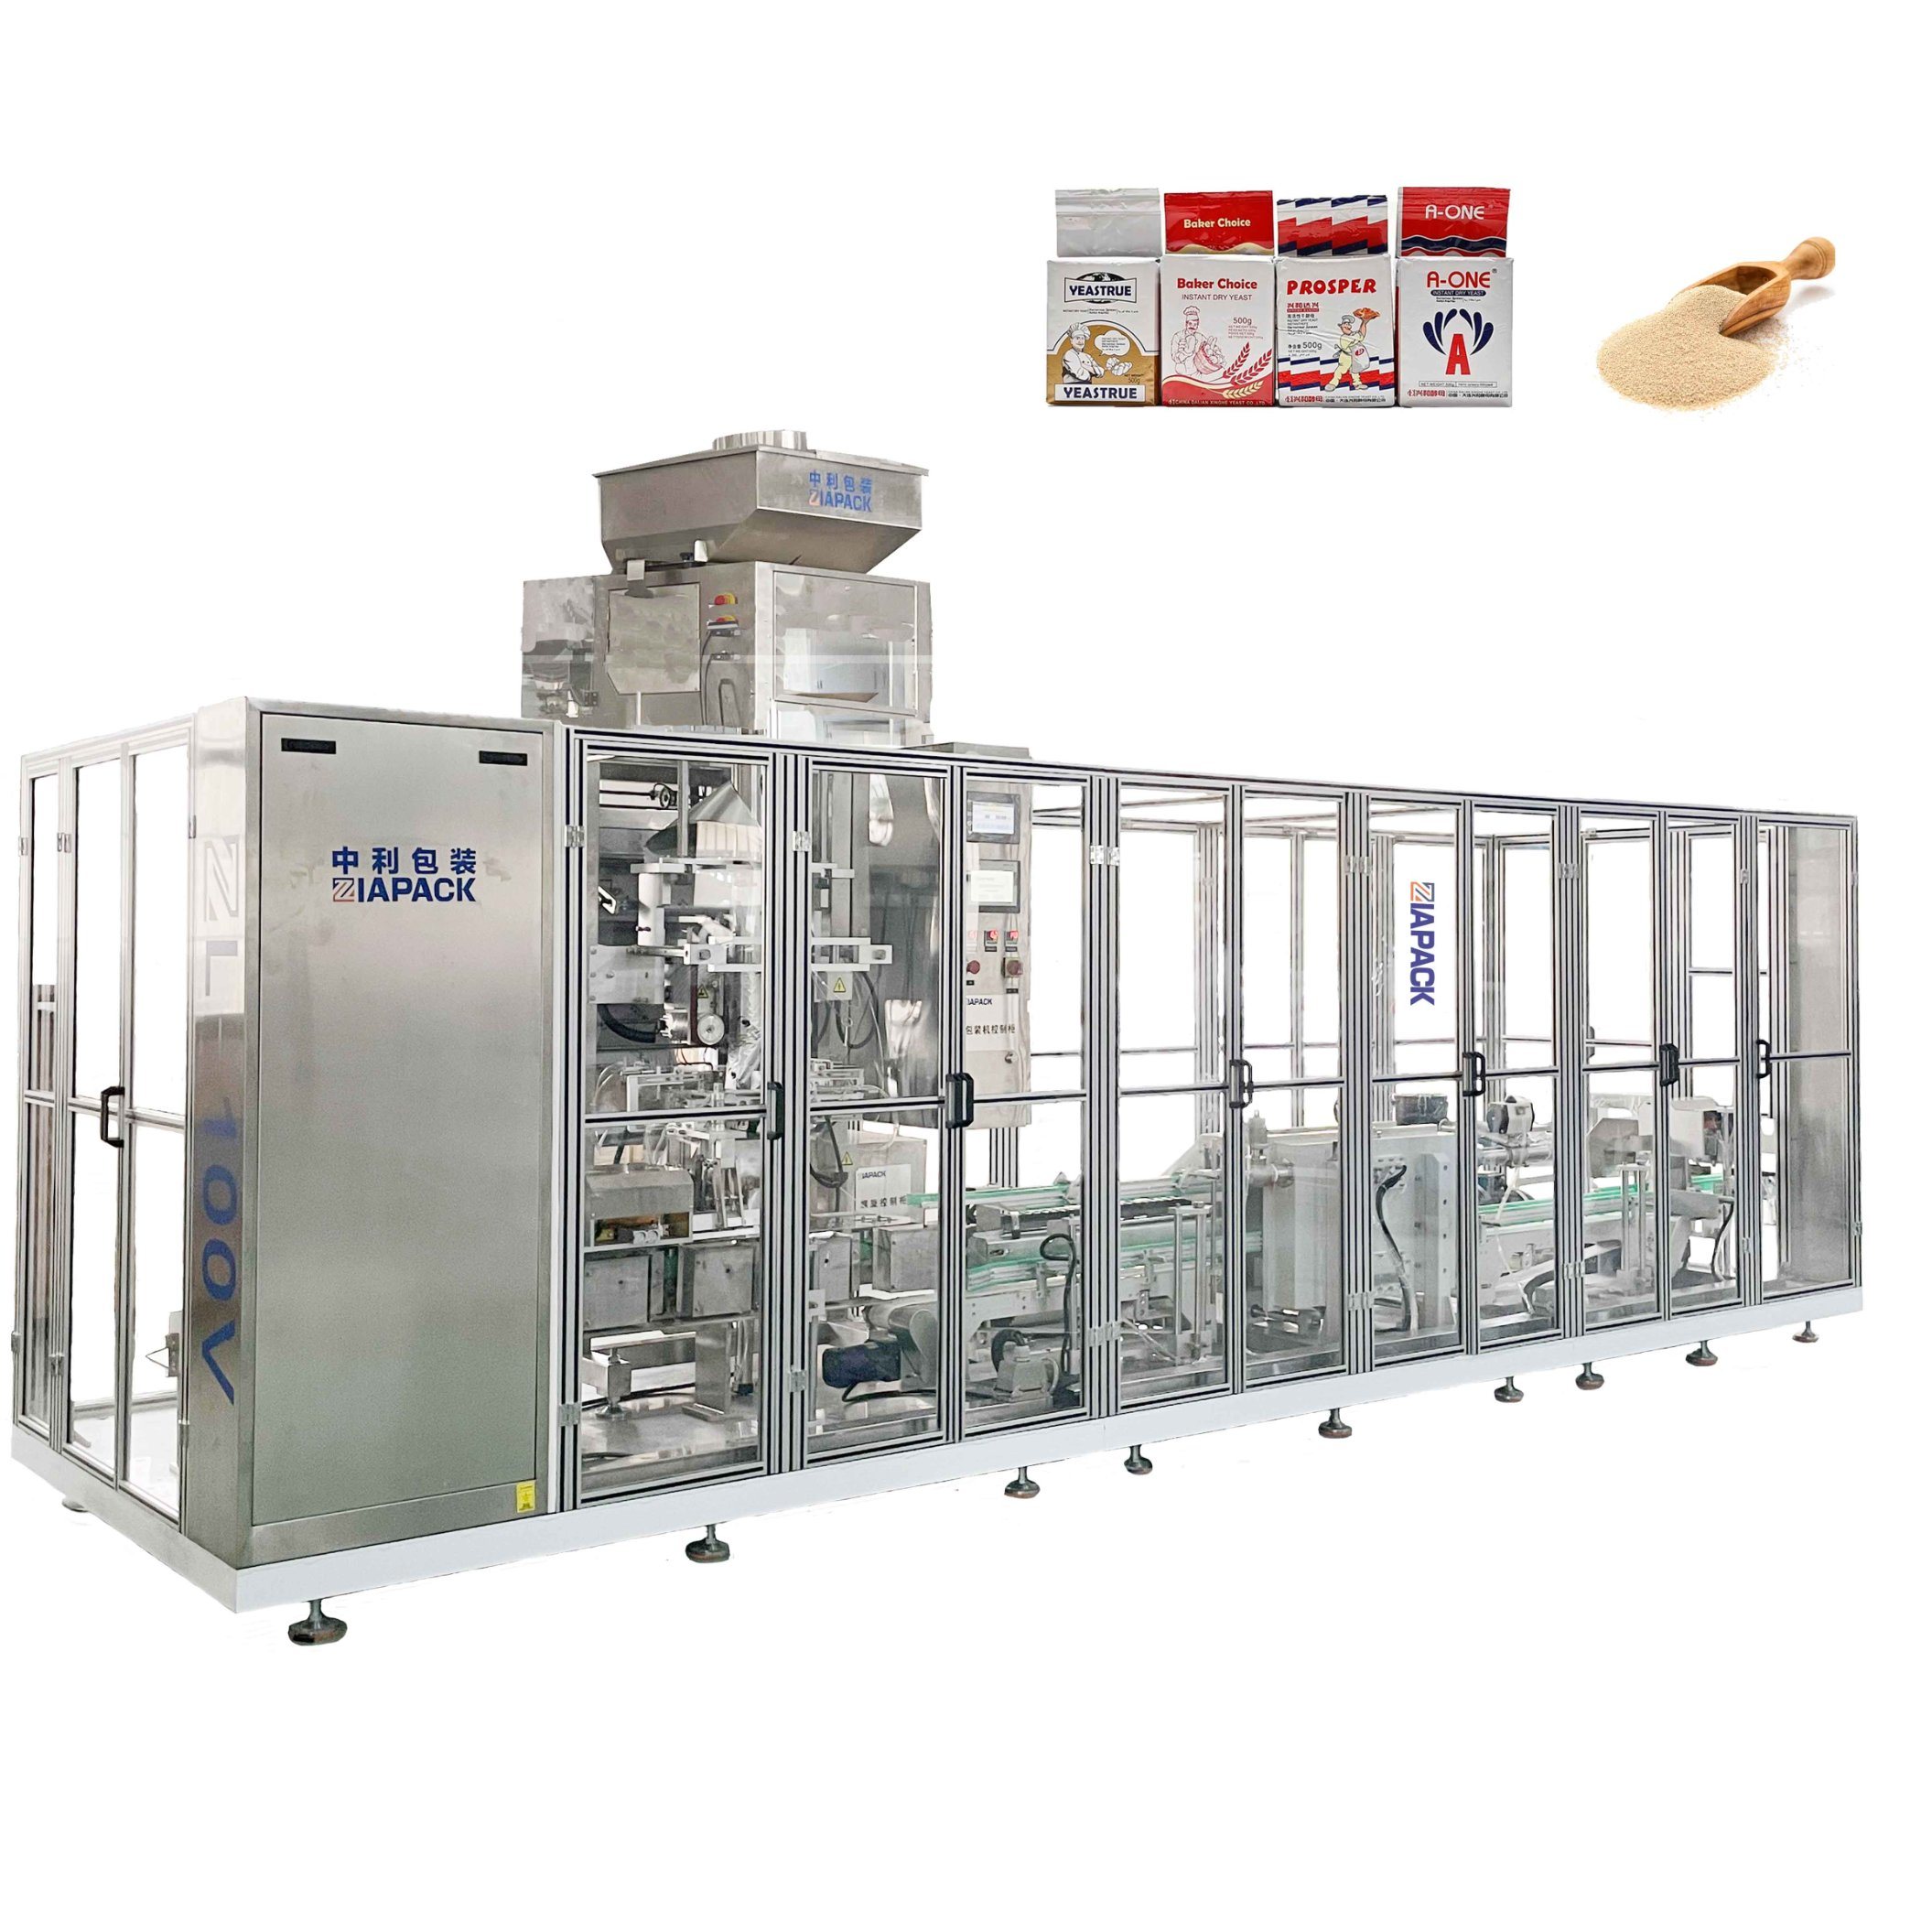 Automatic Brick Bag Vertical Forming Filling Sealing Vacuum Packing Machine for Coffee Powder, Dry Yeast, Rice, Beans, Corn Grits